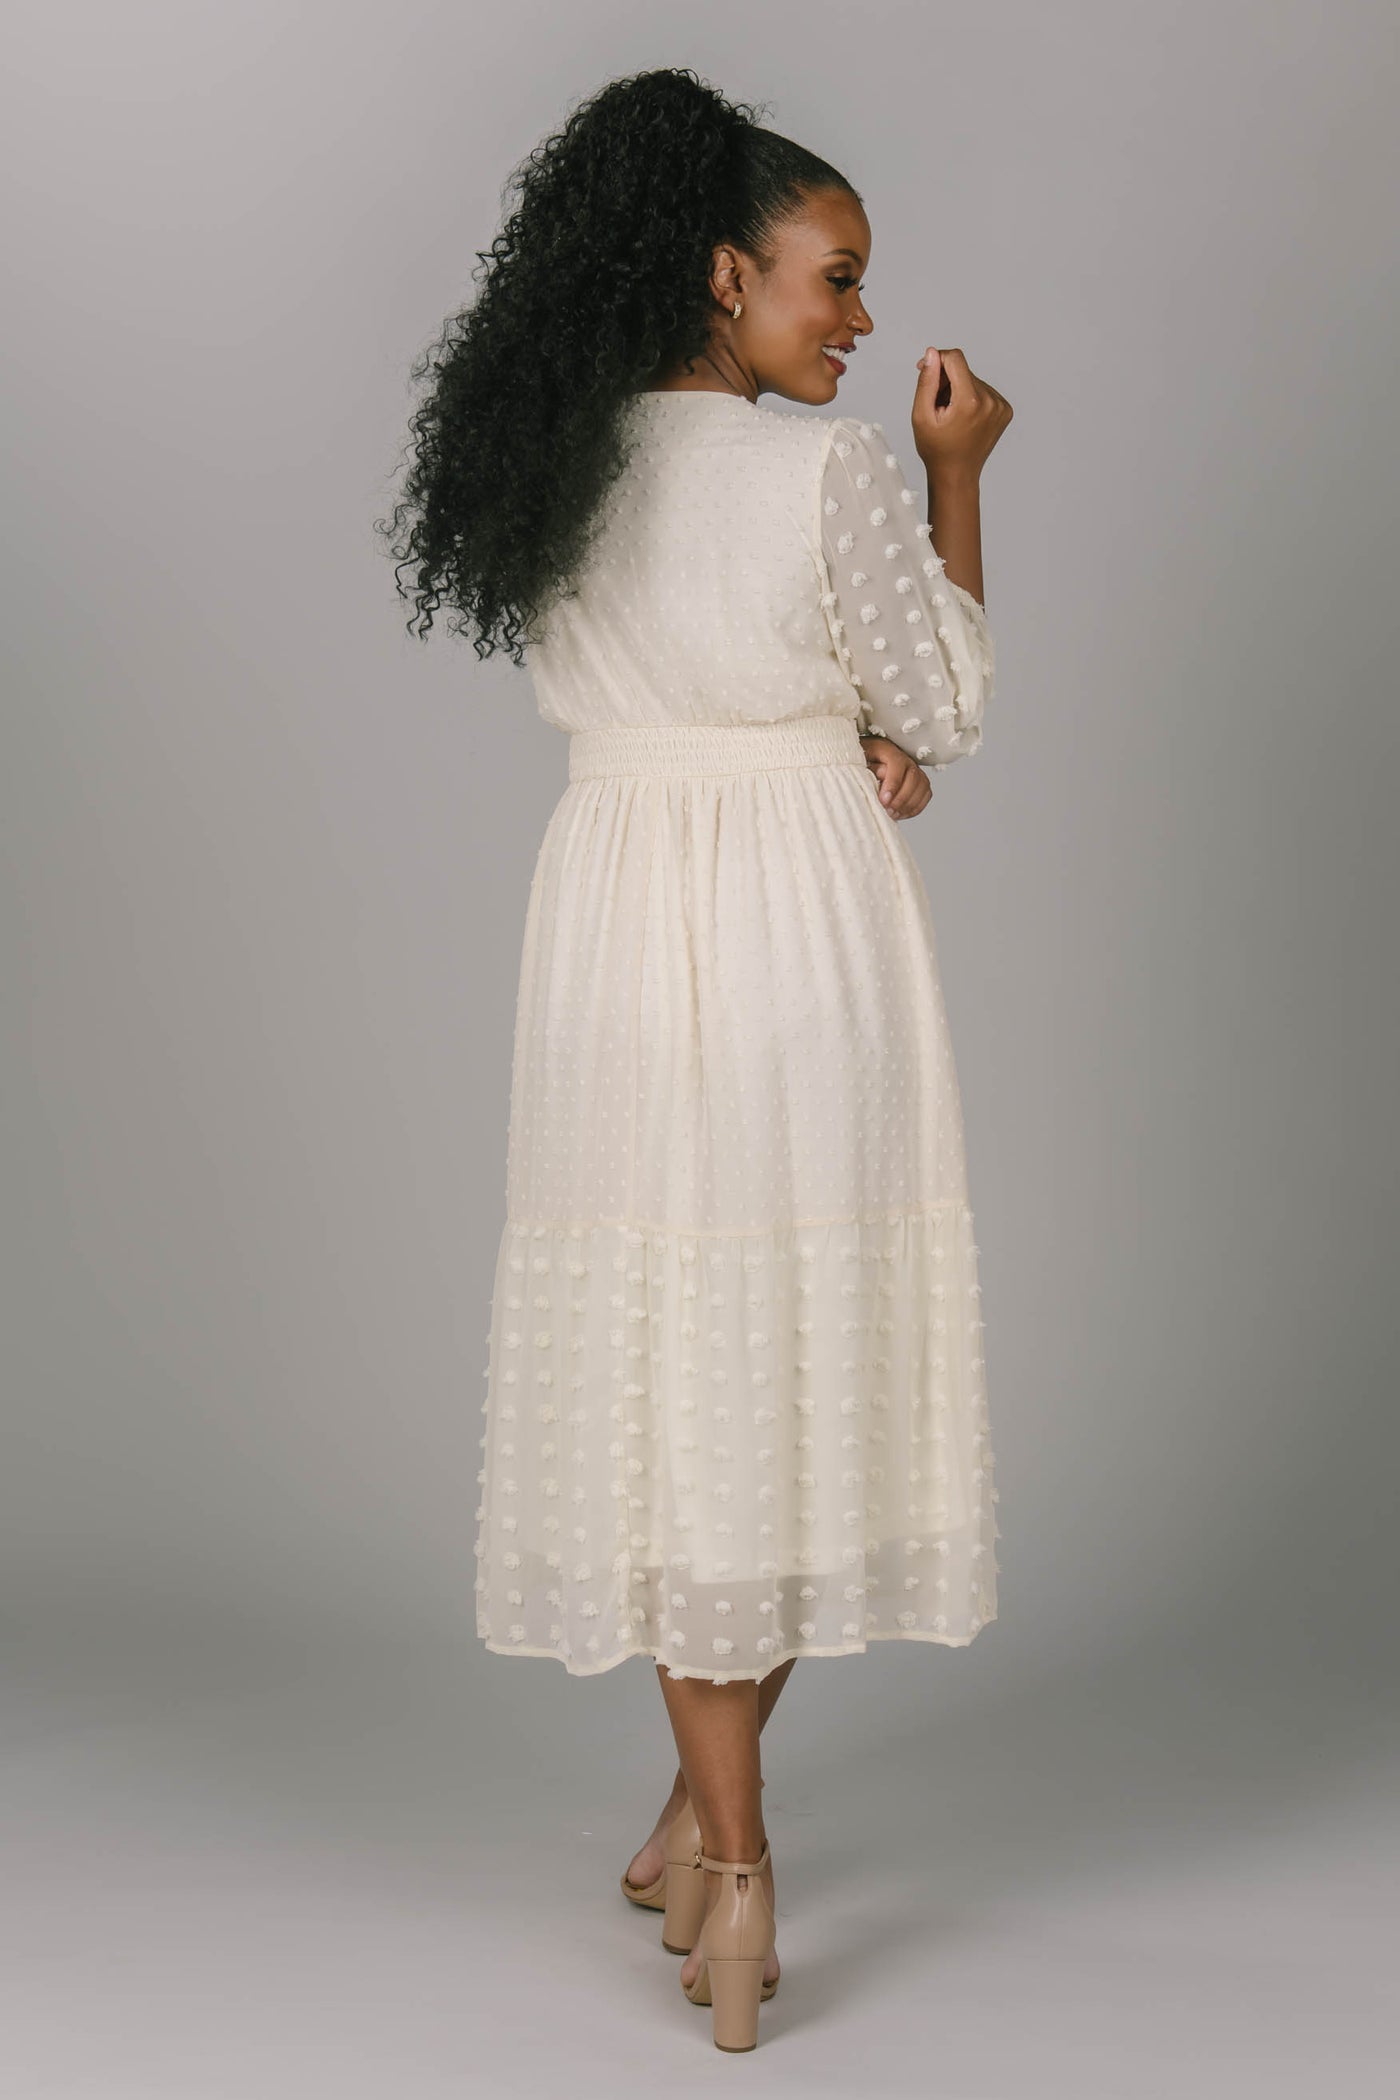 Back view of this modest Swiss dot dress. The length is mid-calf and the waist is cinched that has a square neckline and bishop sleeves. Modest women with a variety of skin tones look amazing in this dress.